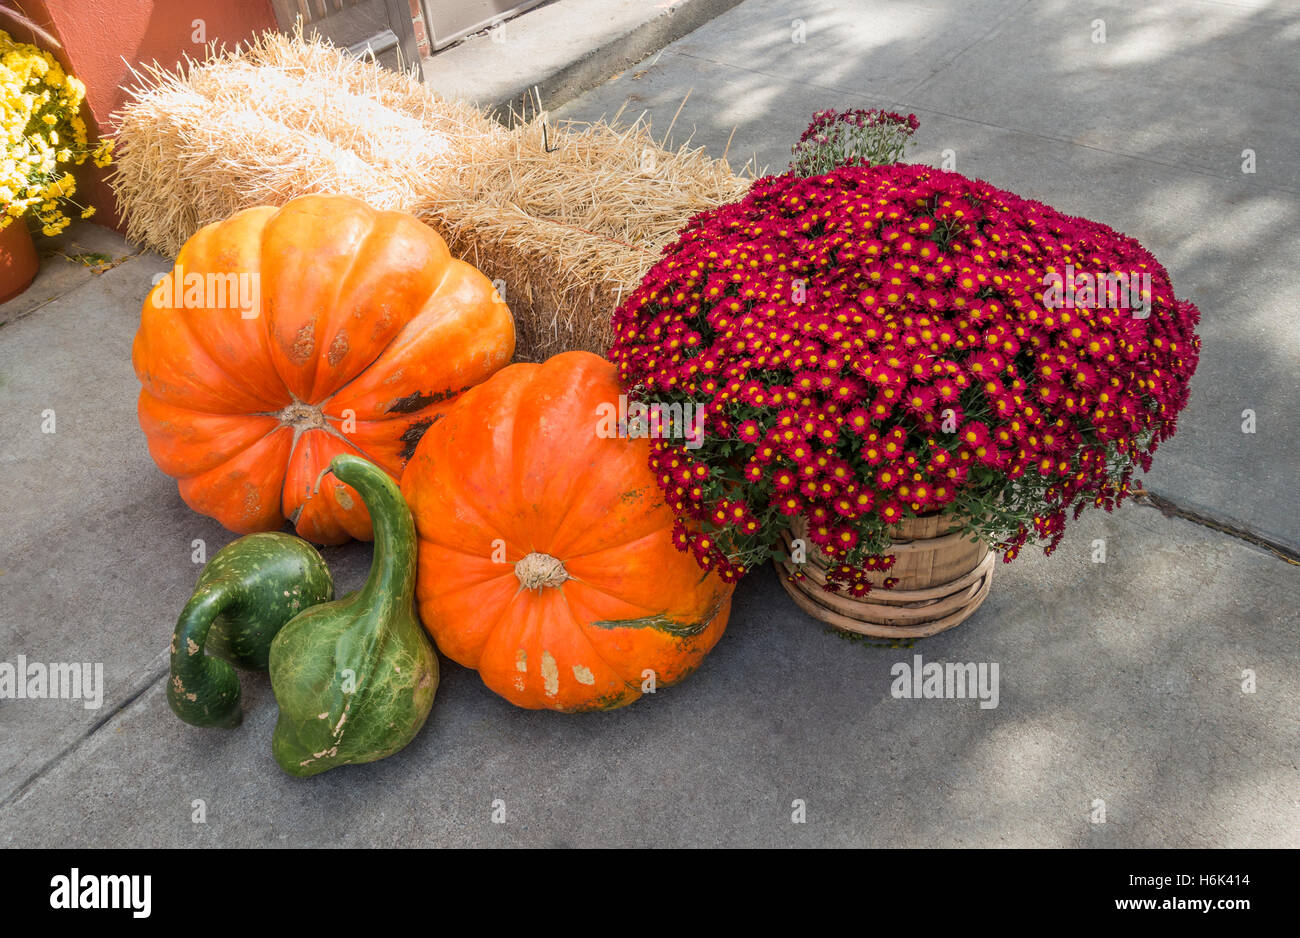 An autumn display includes large pumpkins, New York Aster flowers, and gourds Stock Photo